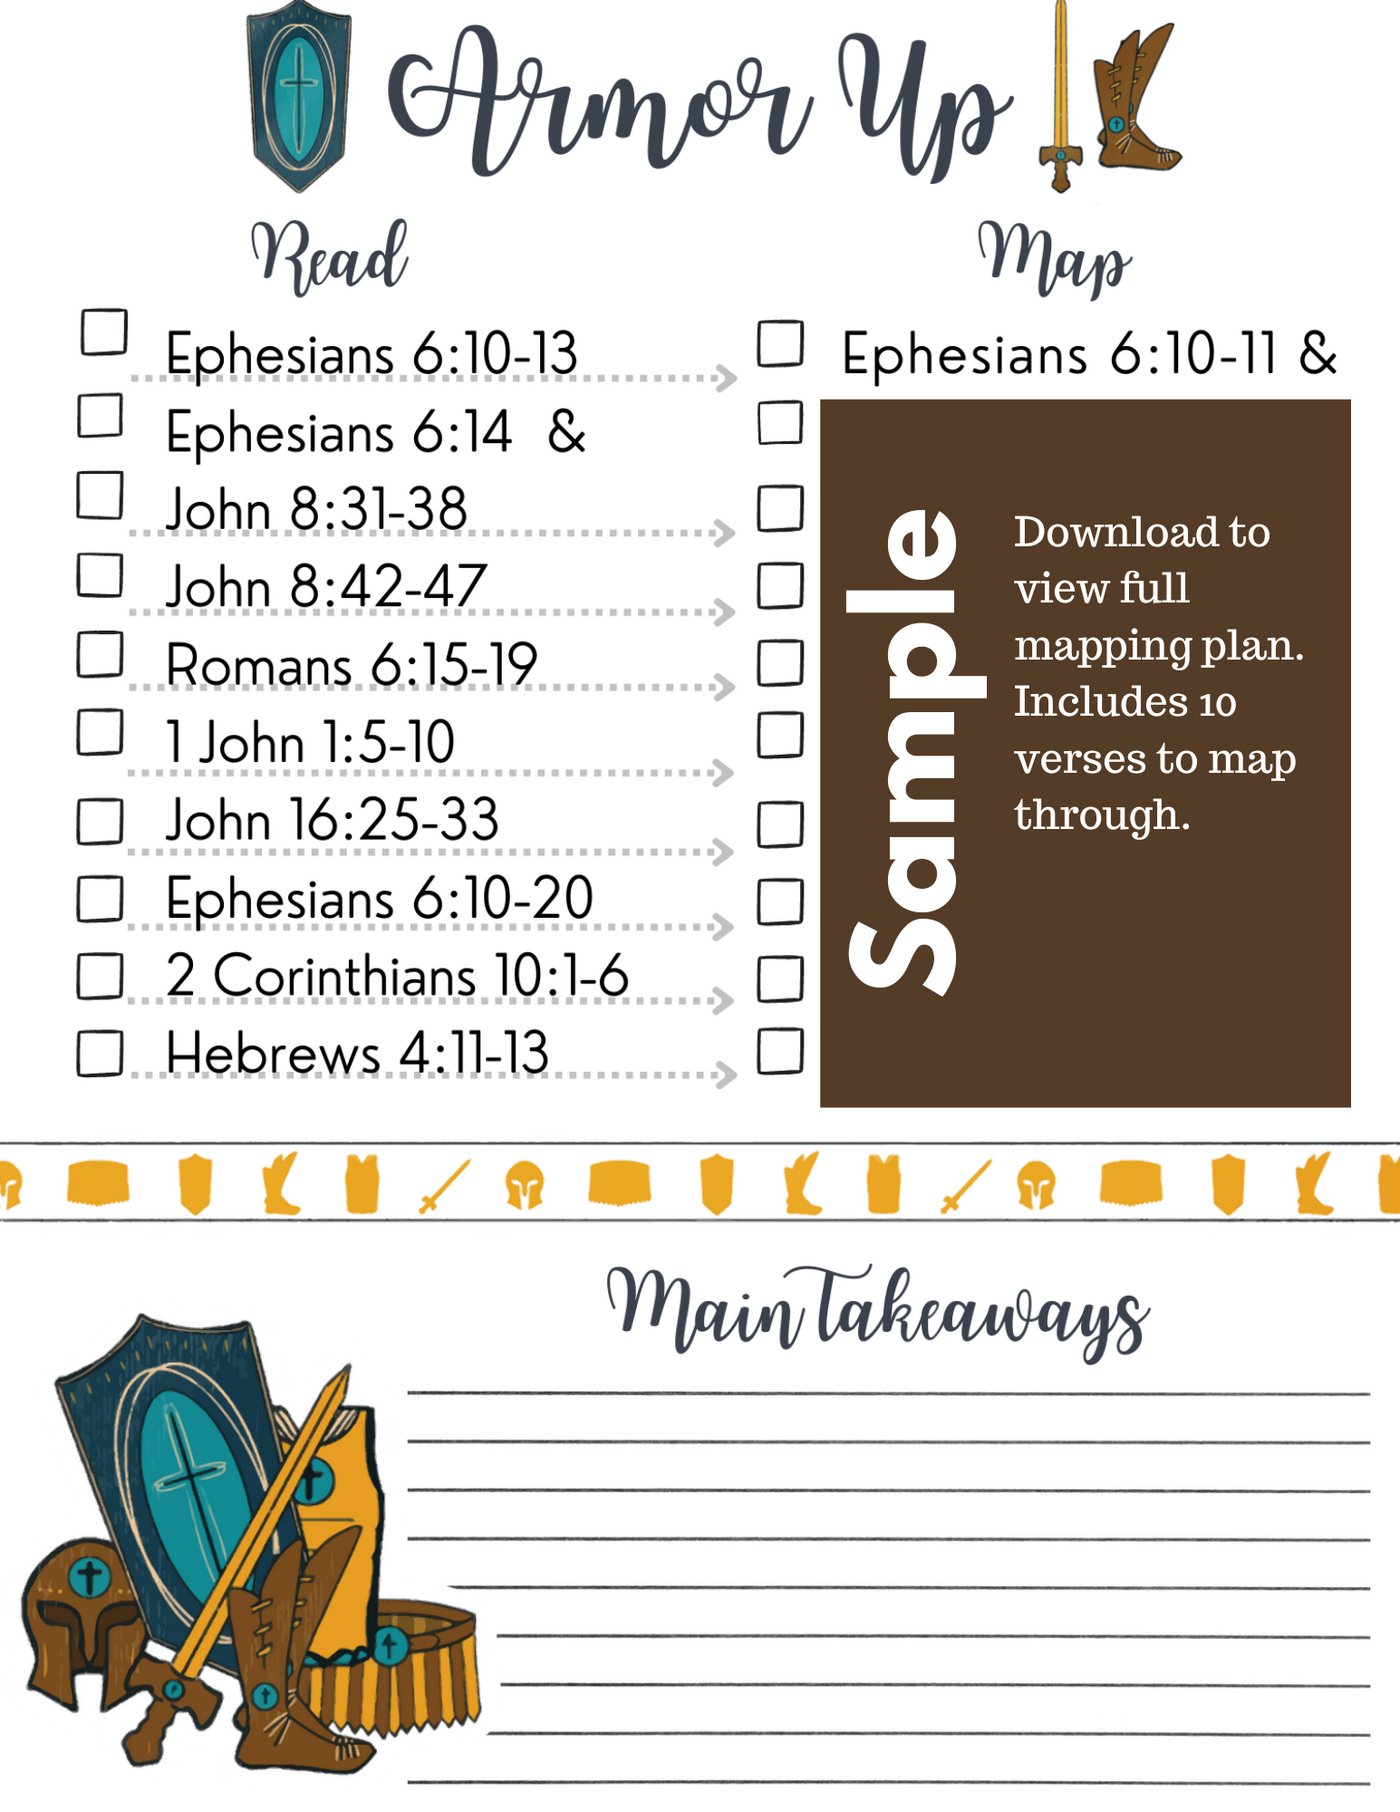 Armor Up Verse Mapping Plan